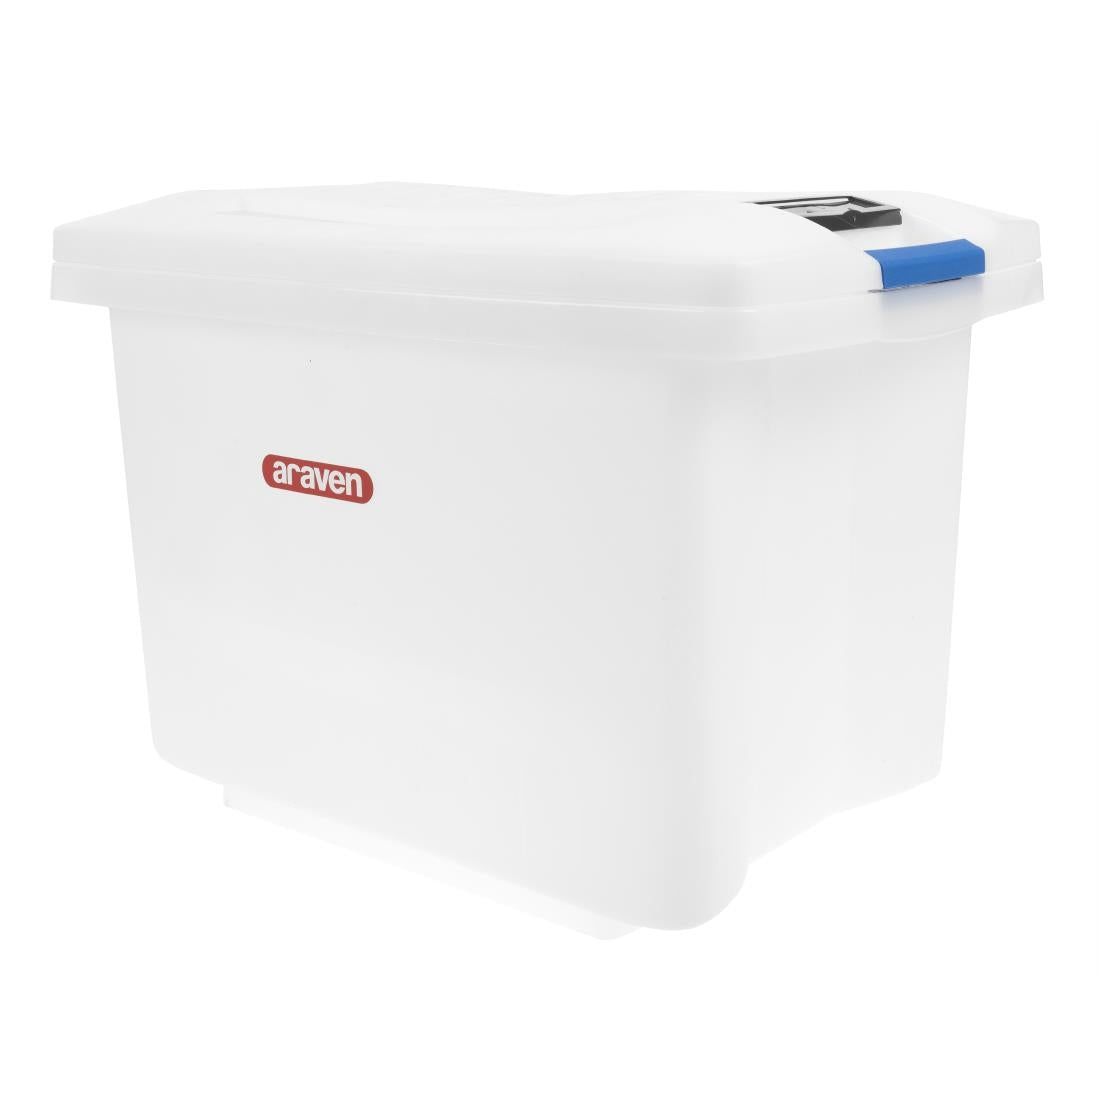 Araven Food Storage Container 50Ltr JD Catering Equipment Solutions Ltd